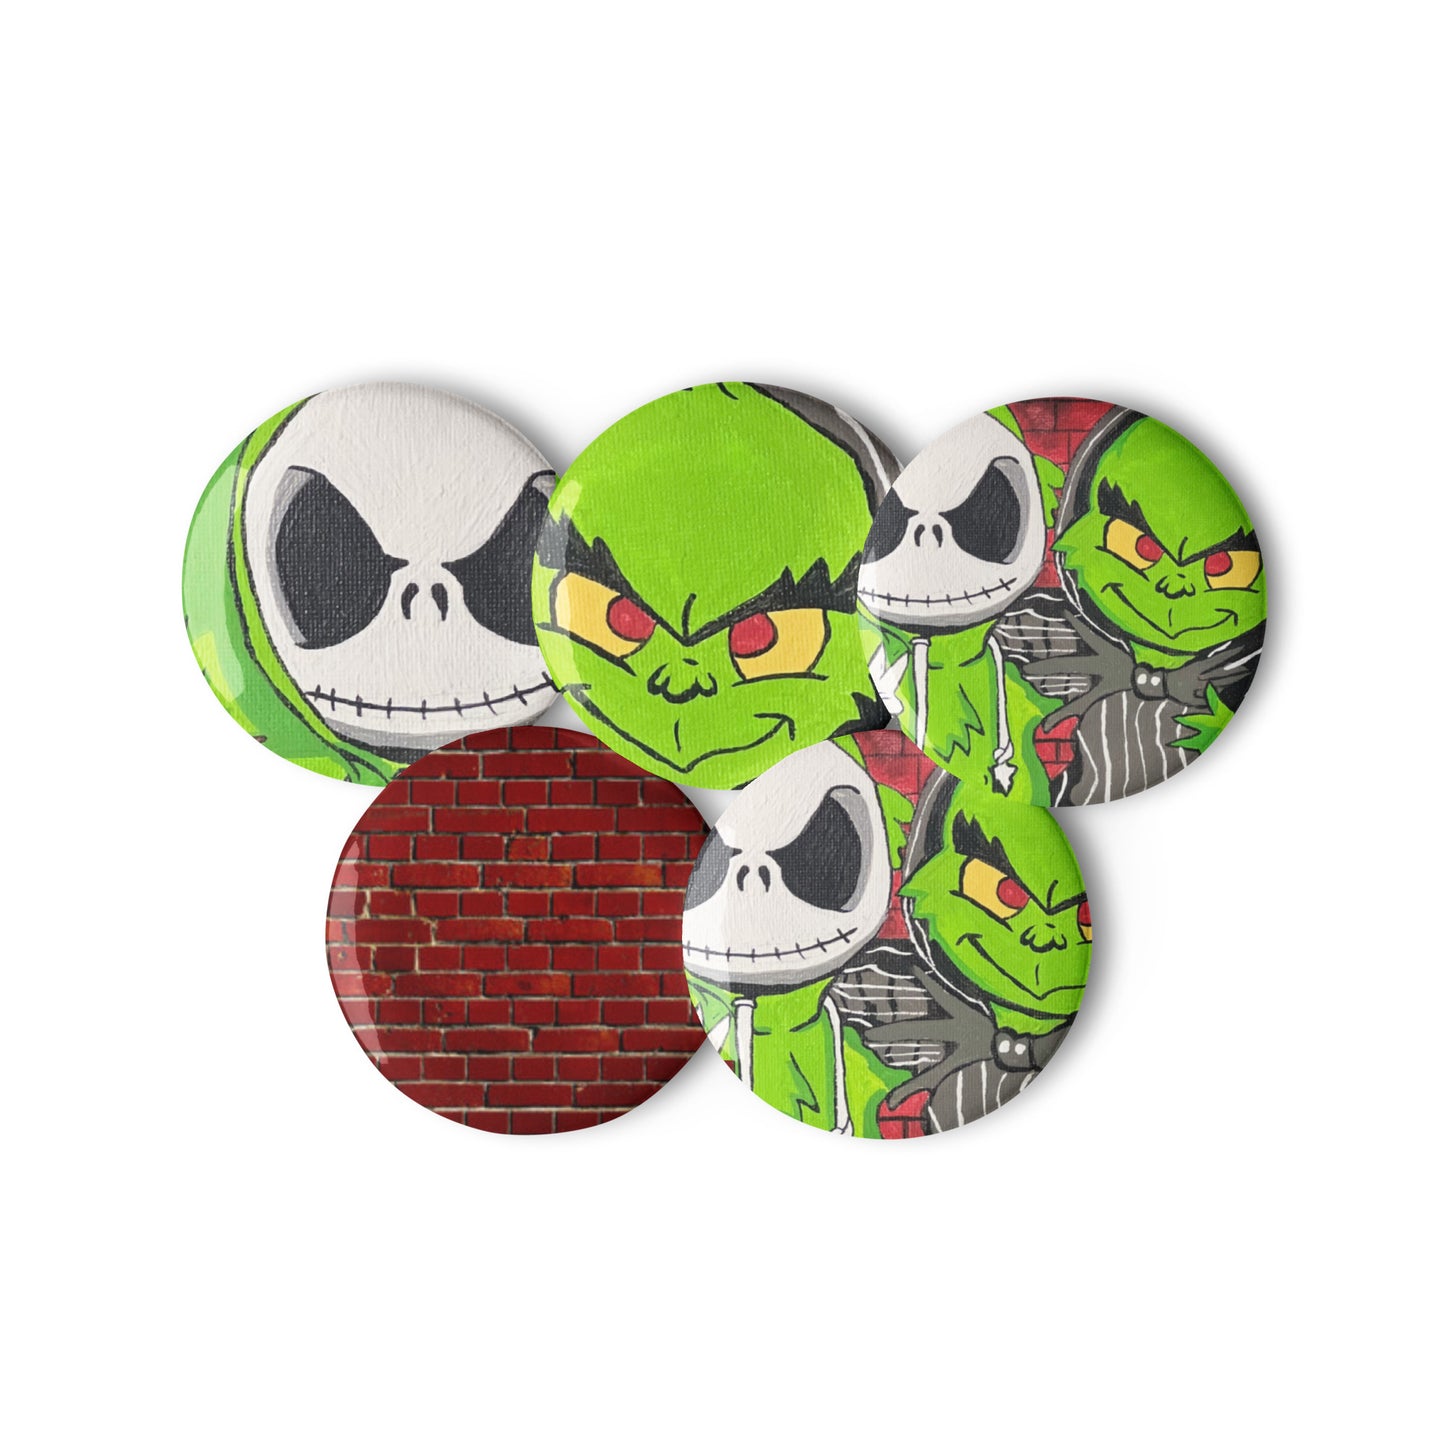 Lil Jack & Lil Grinch Chillen set of pin buttons